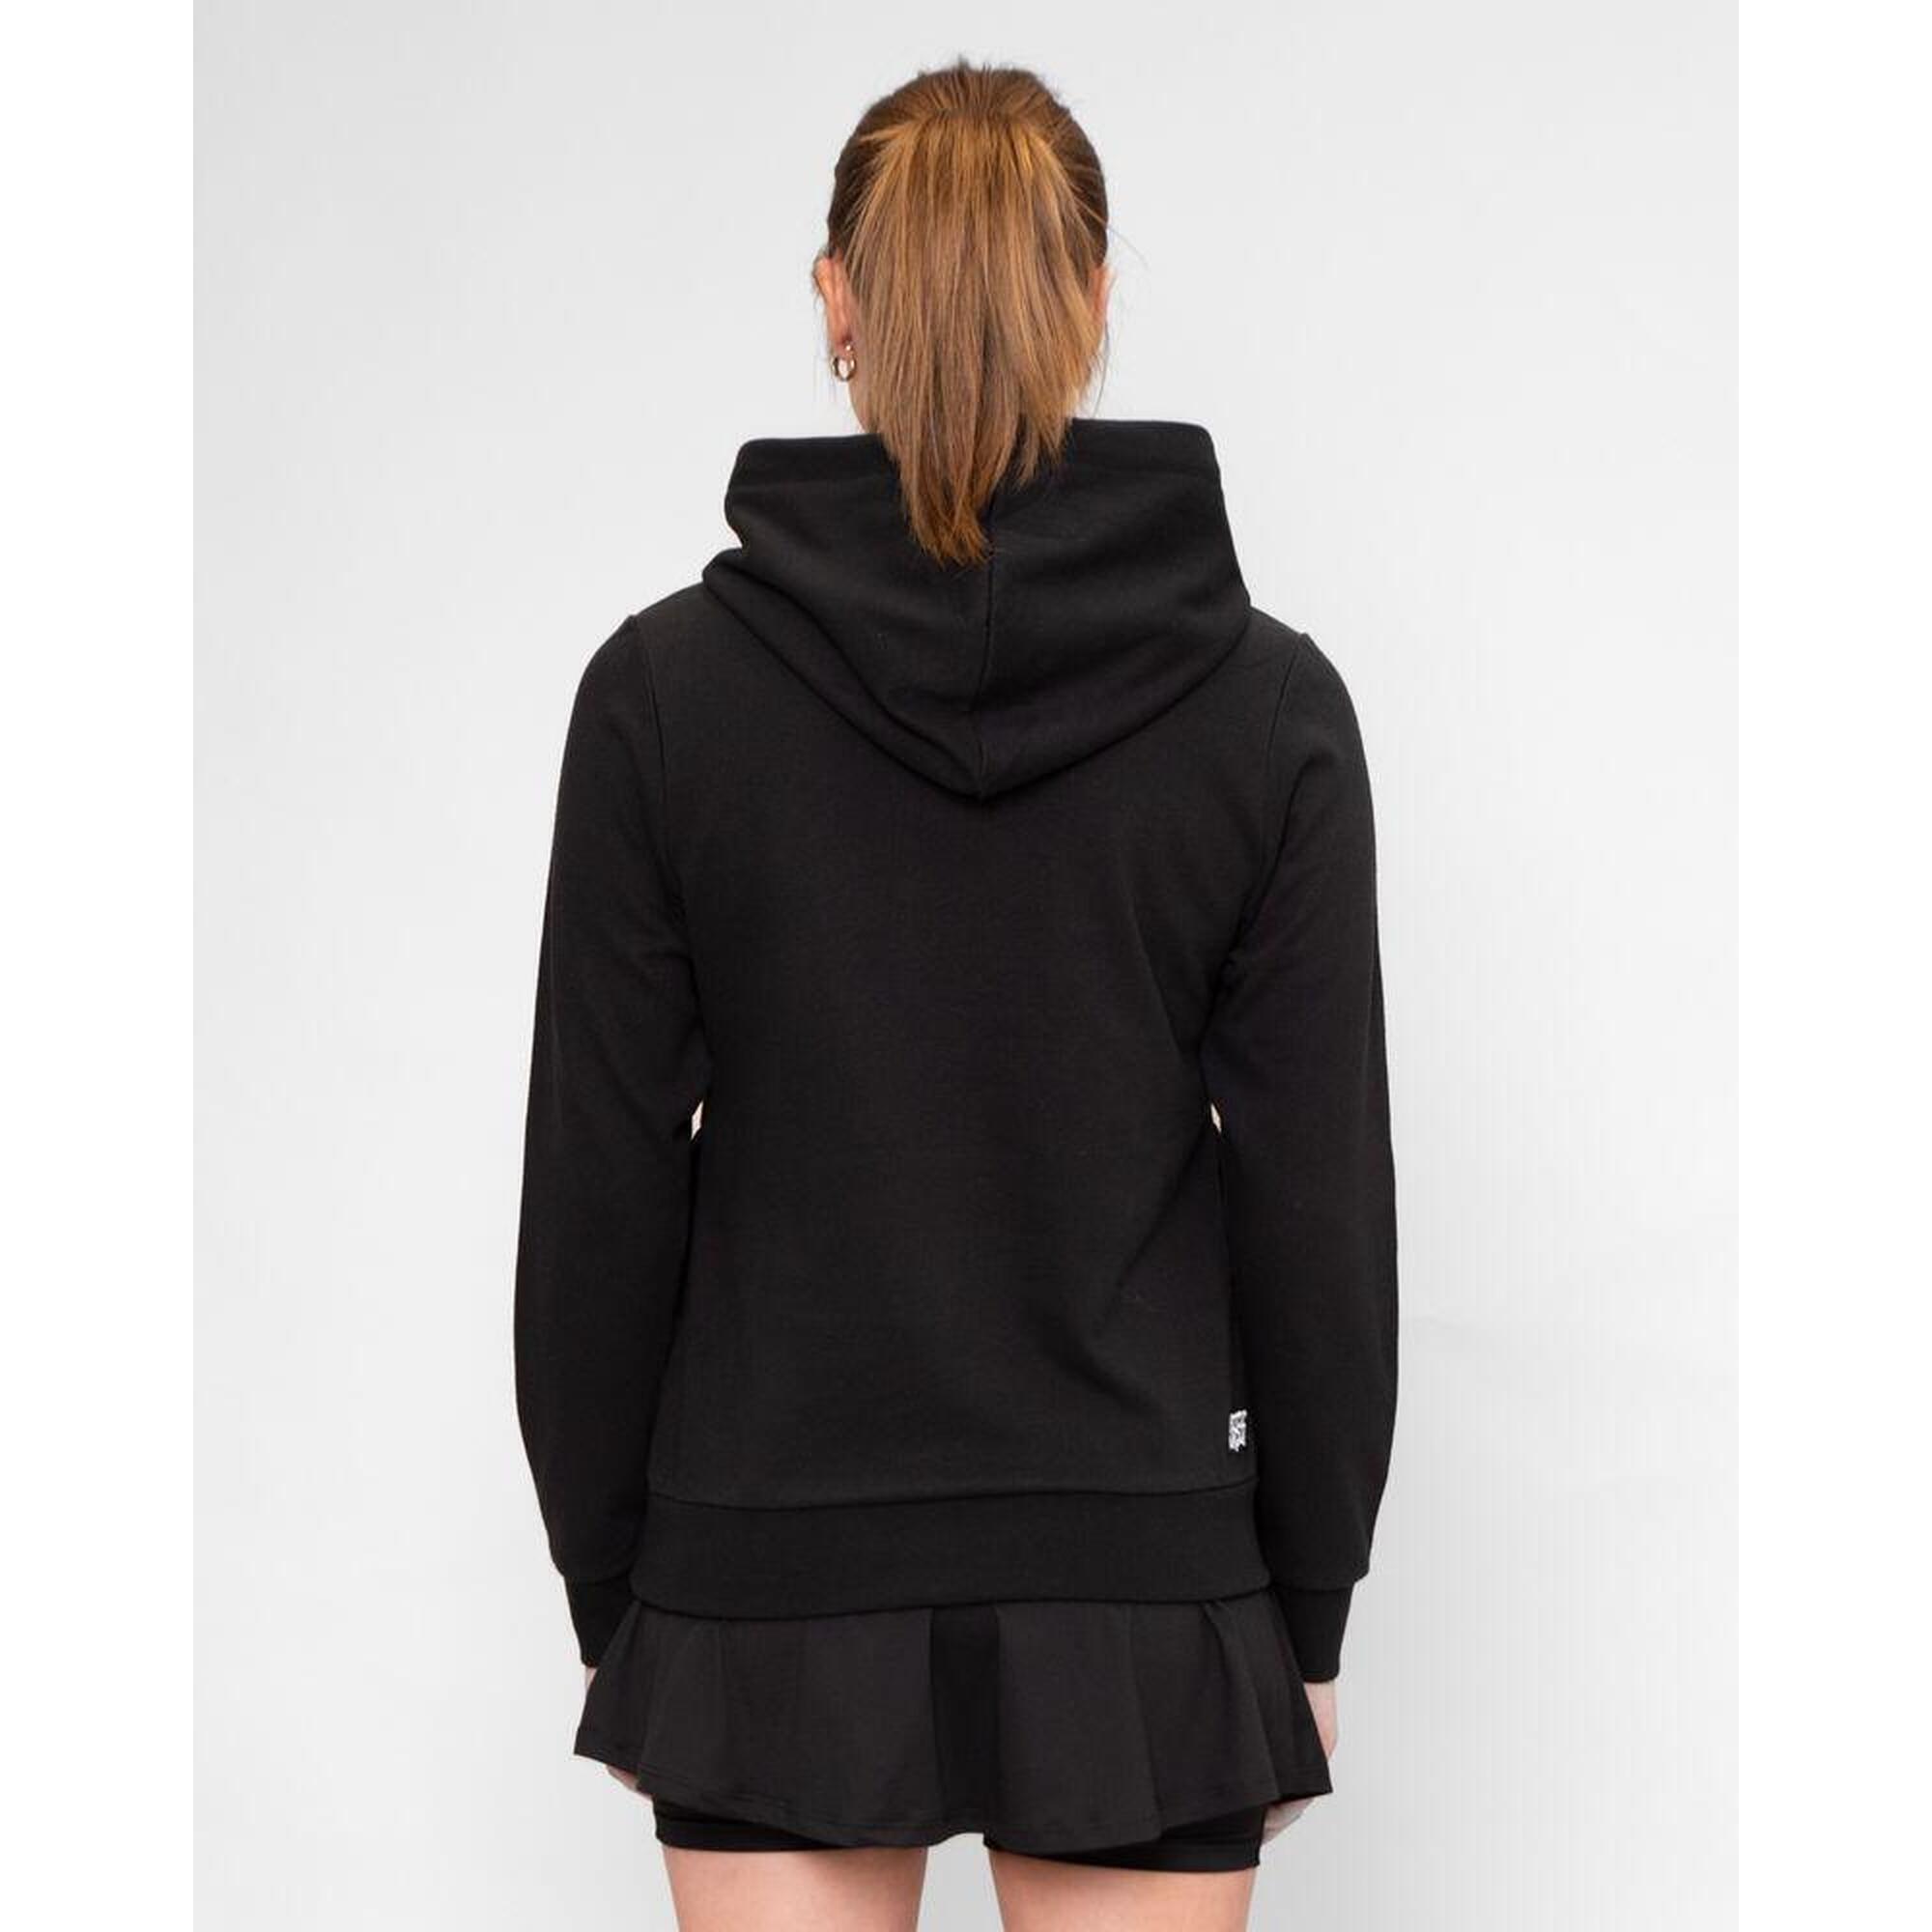 Protected Leafs Chill Hoody - black, white